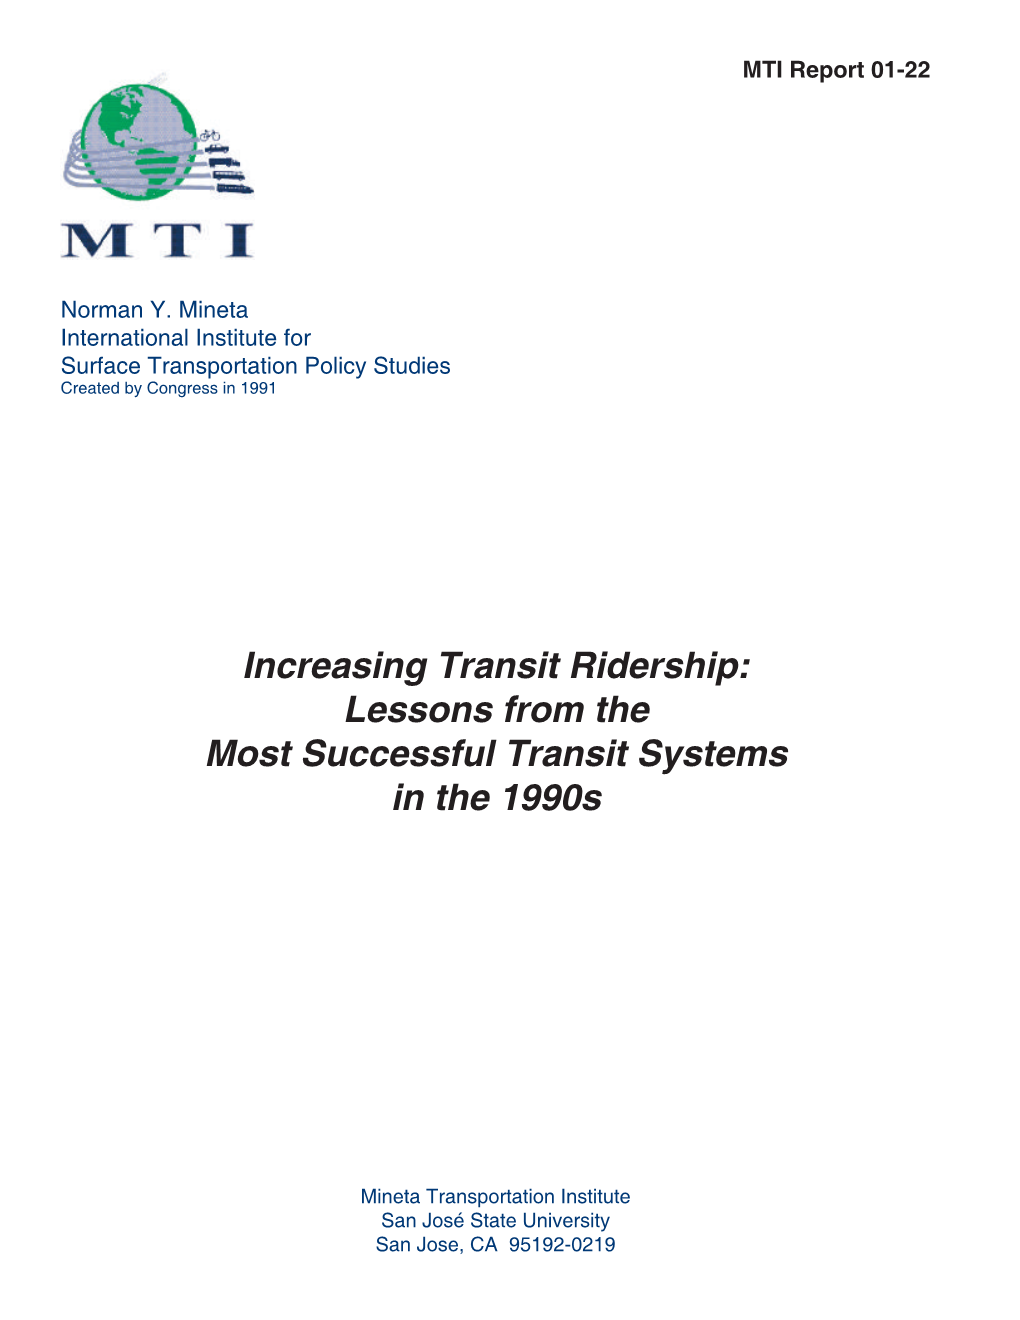 Increasing Transit Ridership: Lessons from the Most Successful Transit Systems in the 1990S